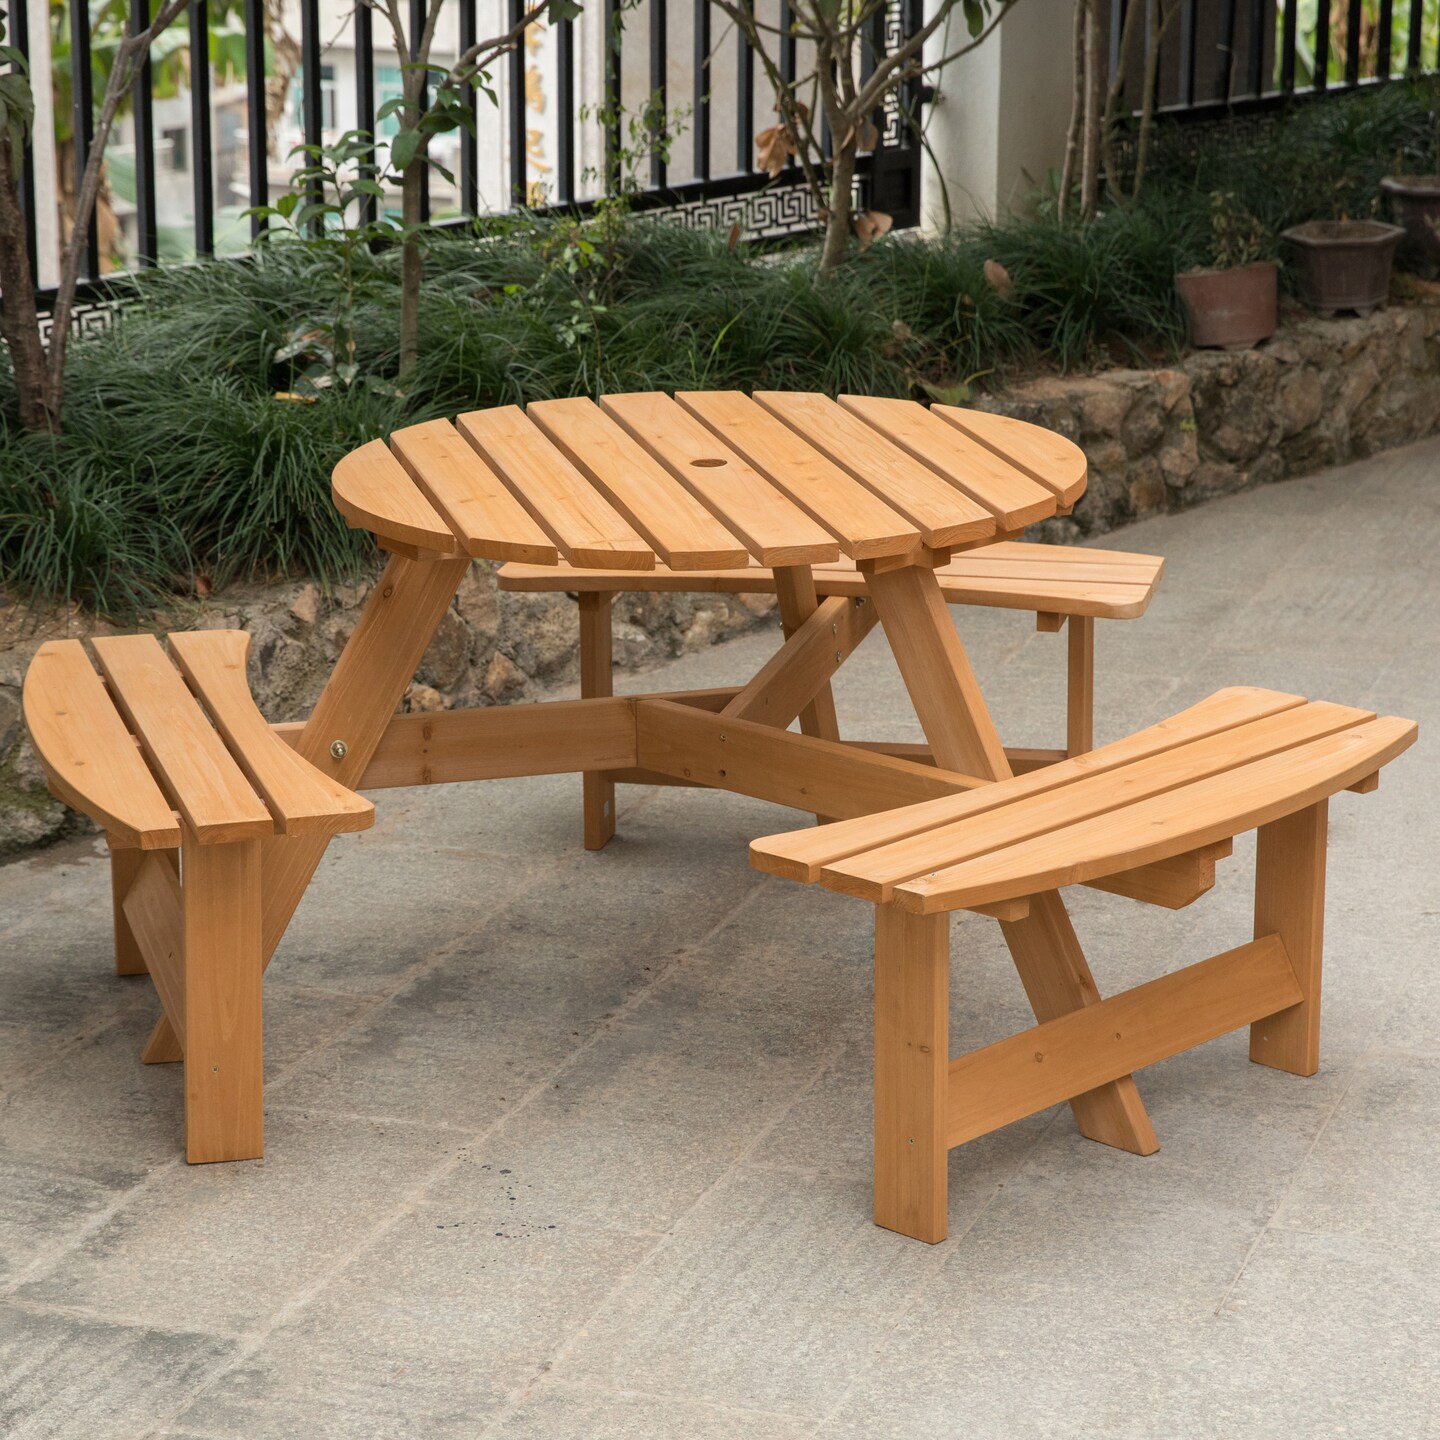 Wooden Outdoor Round Picnic Table with Bench for Patio, 6- Person with Umbrella Hole